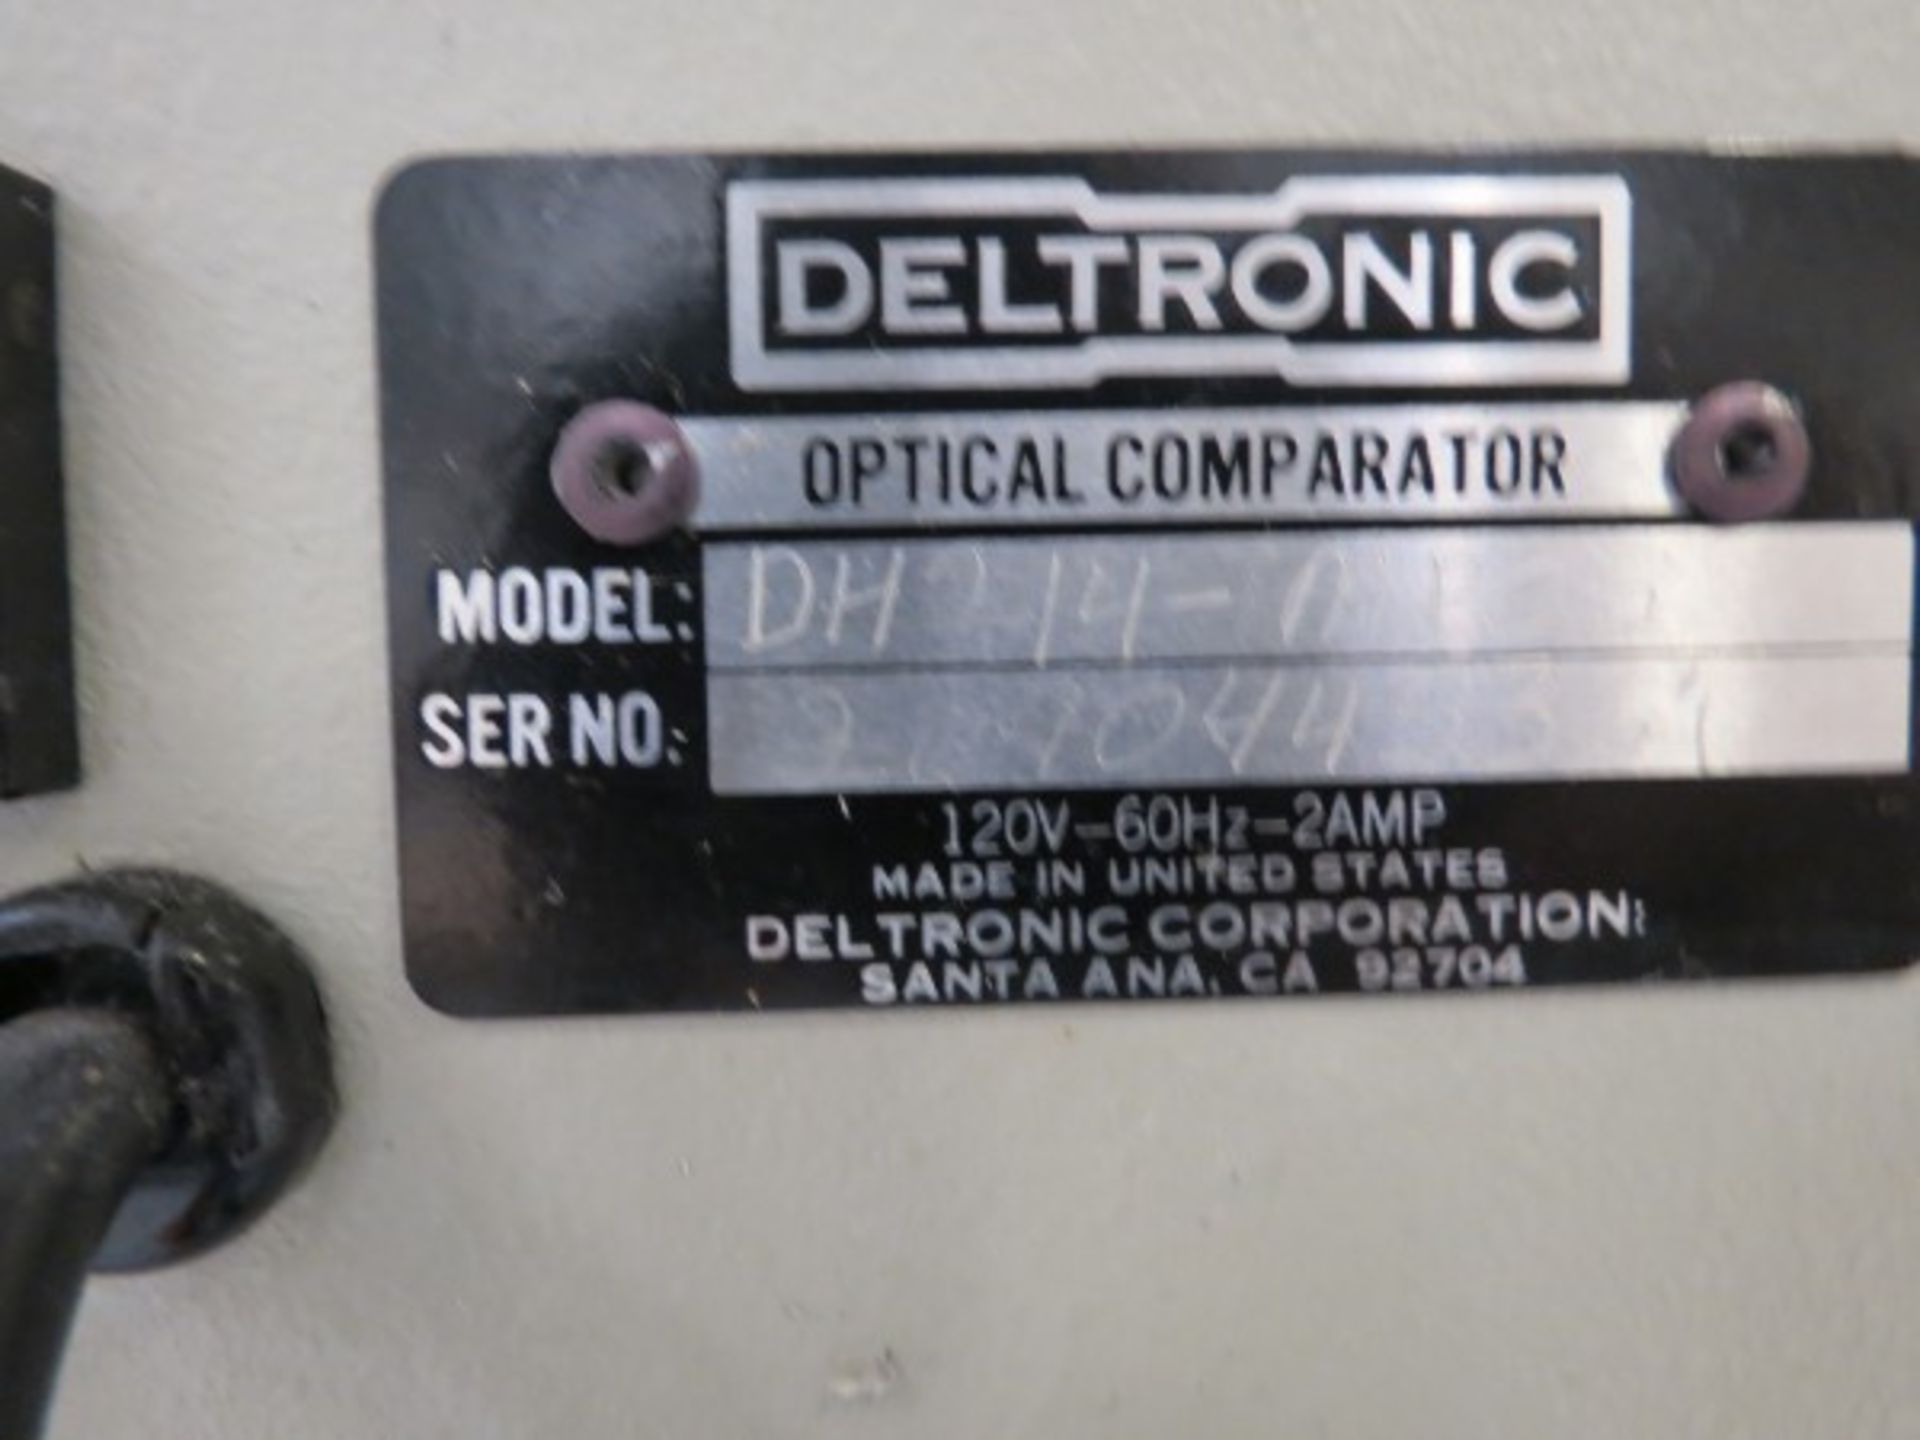 Deltronic DH214 14" Comparator, 50x magnifying lens, with DRO, S/N 2690445361 - Image 5 of 5